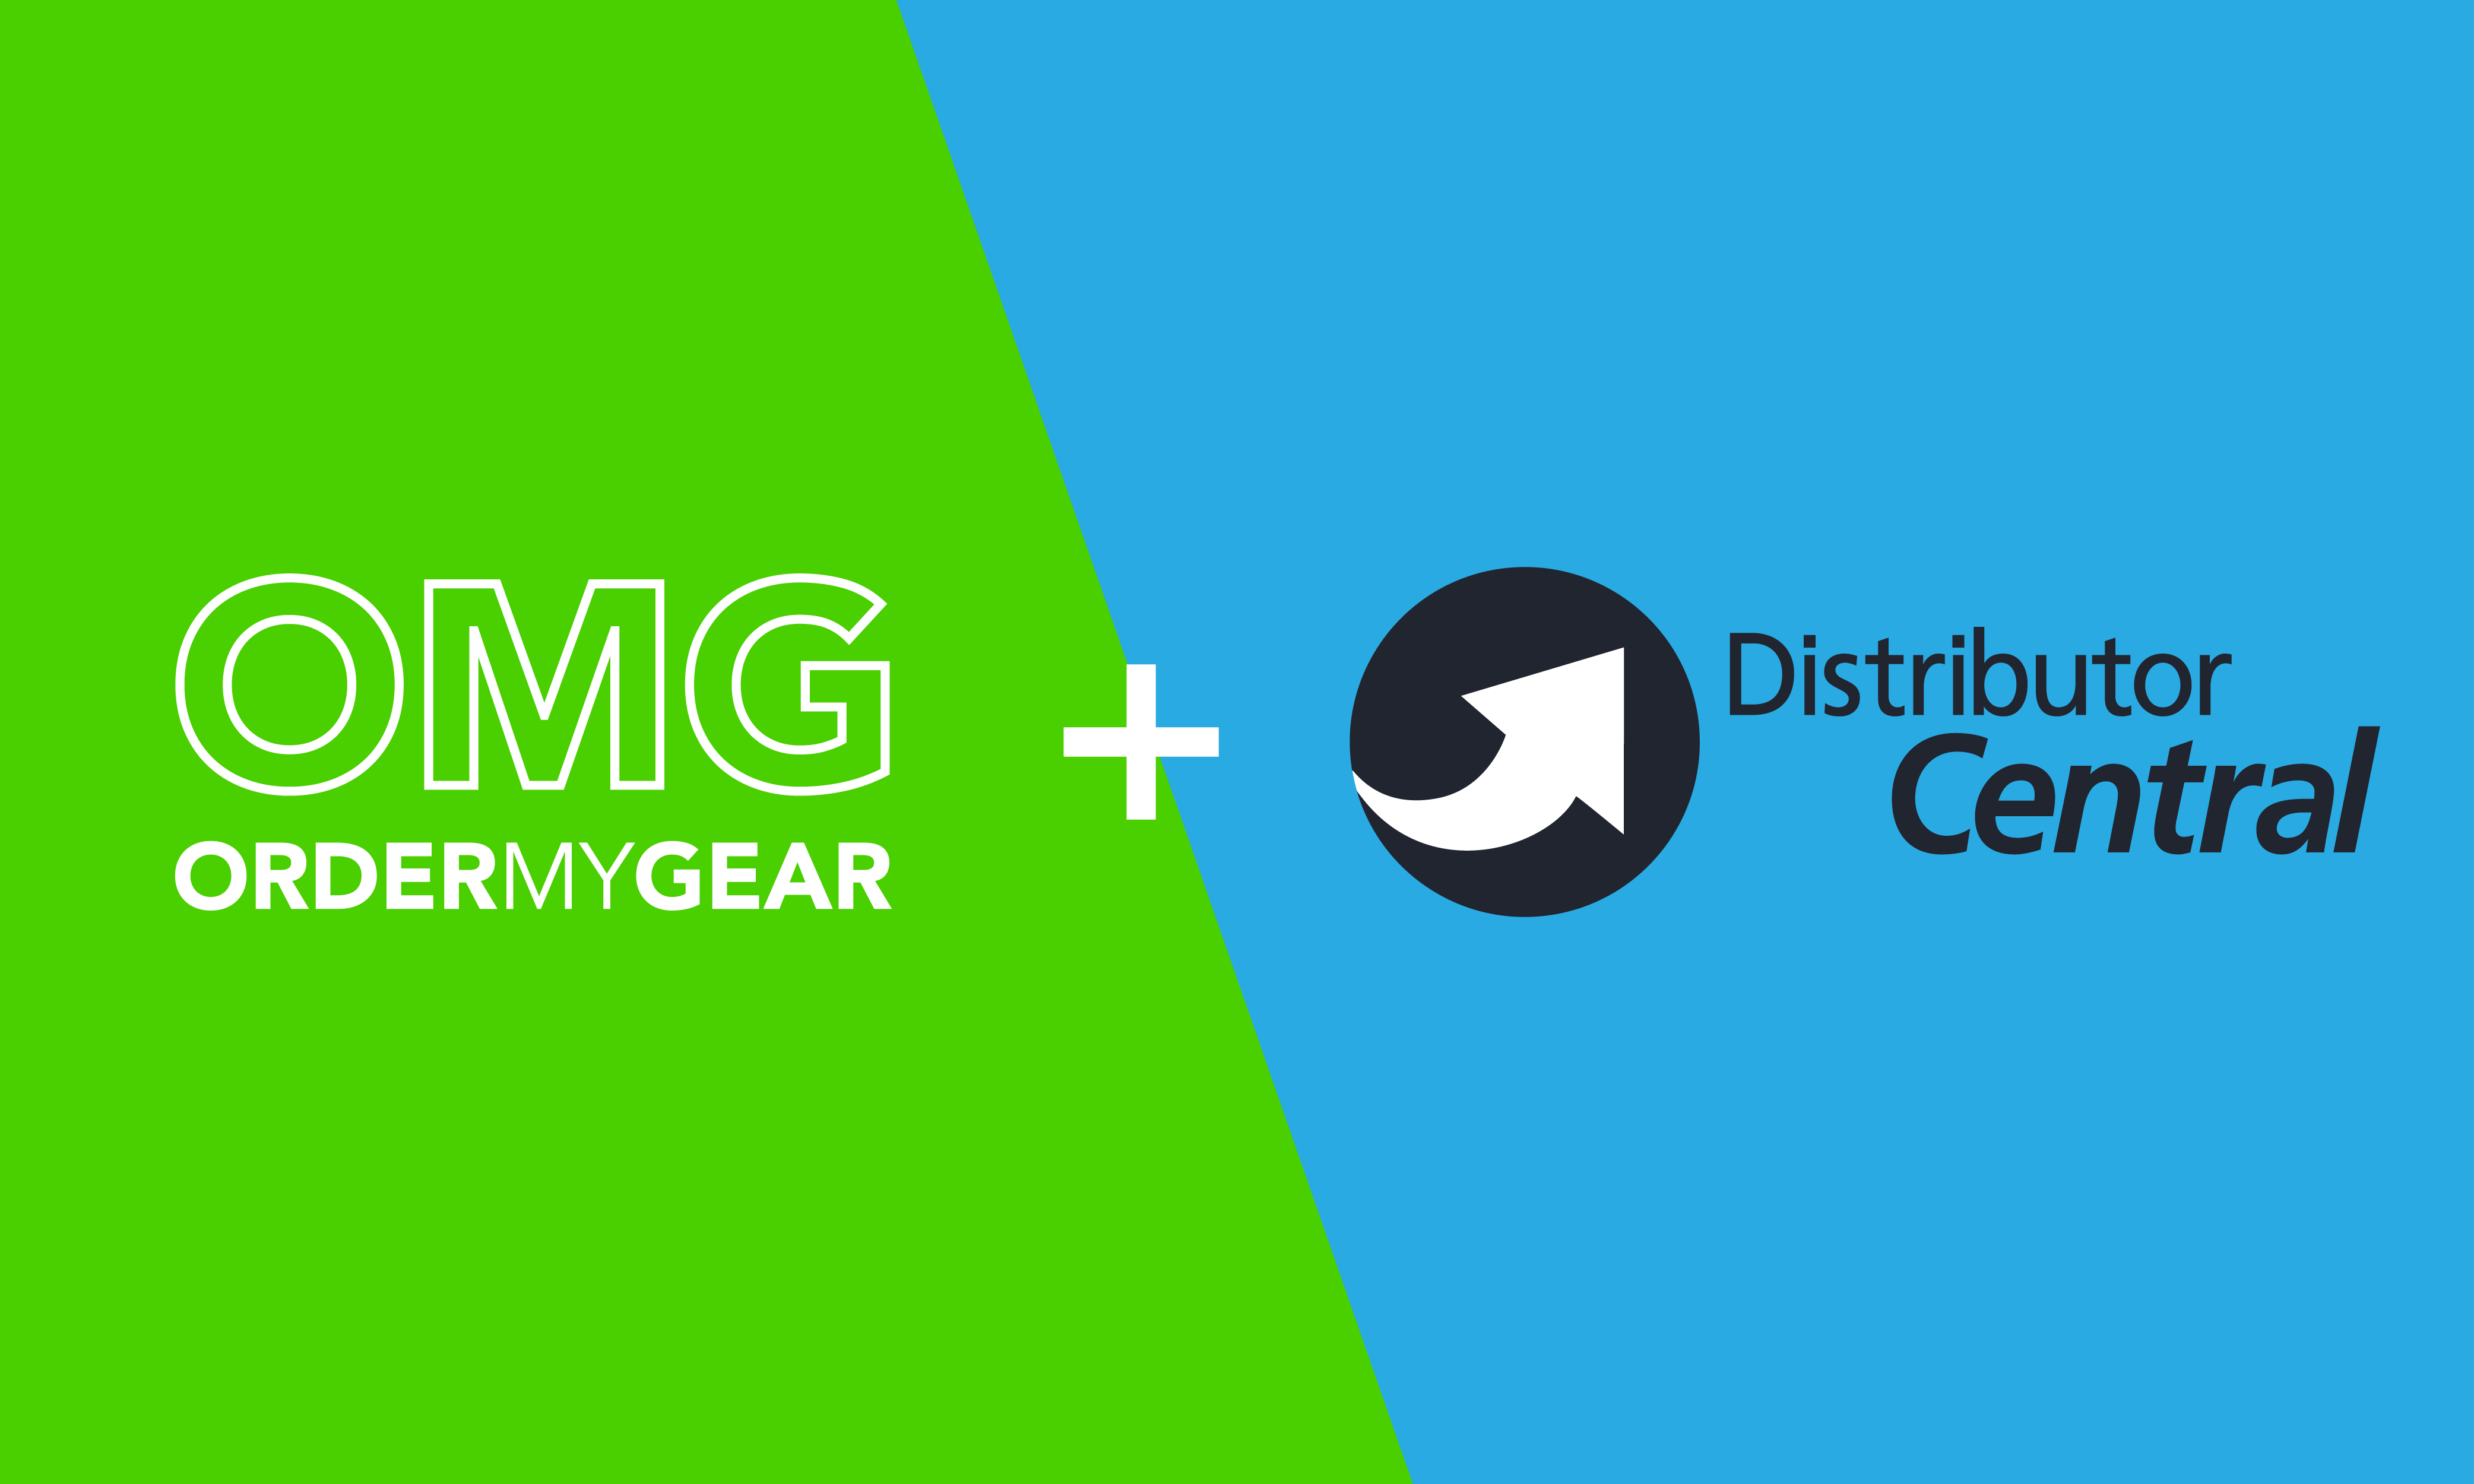 OrderMyGear and Distributor Central